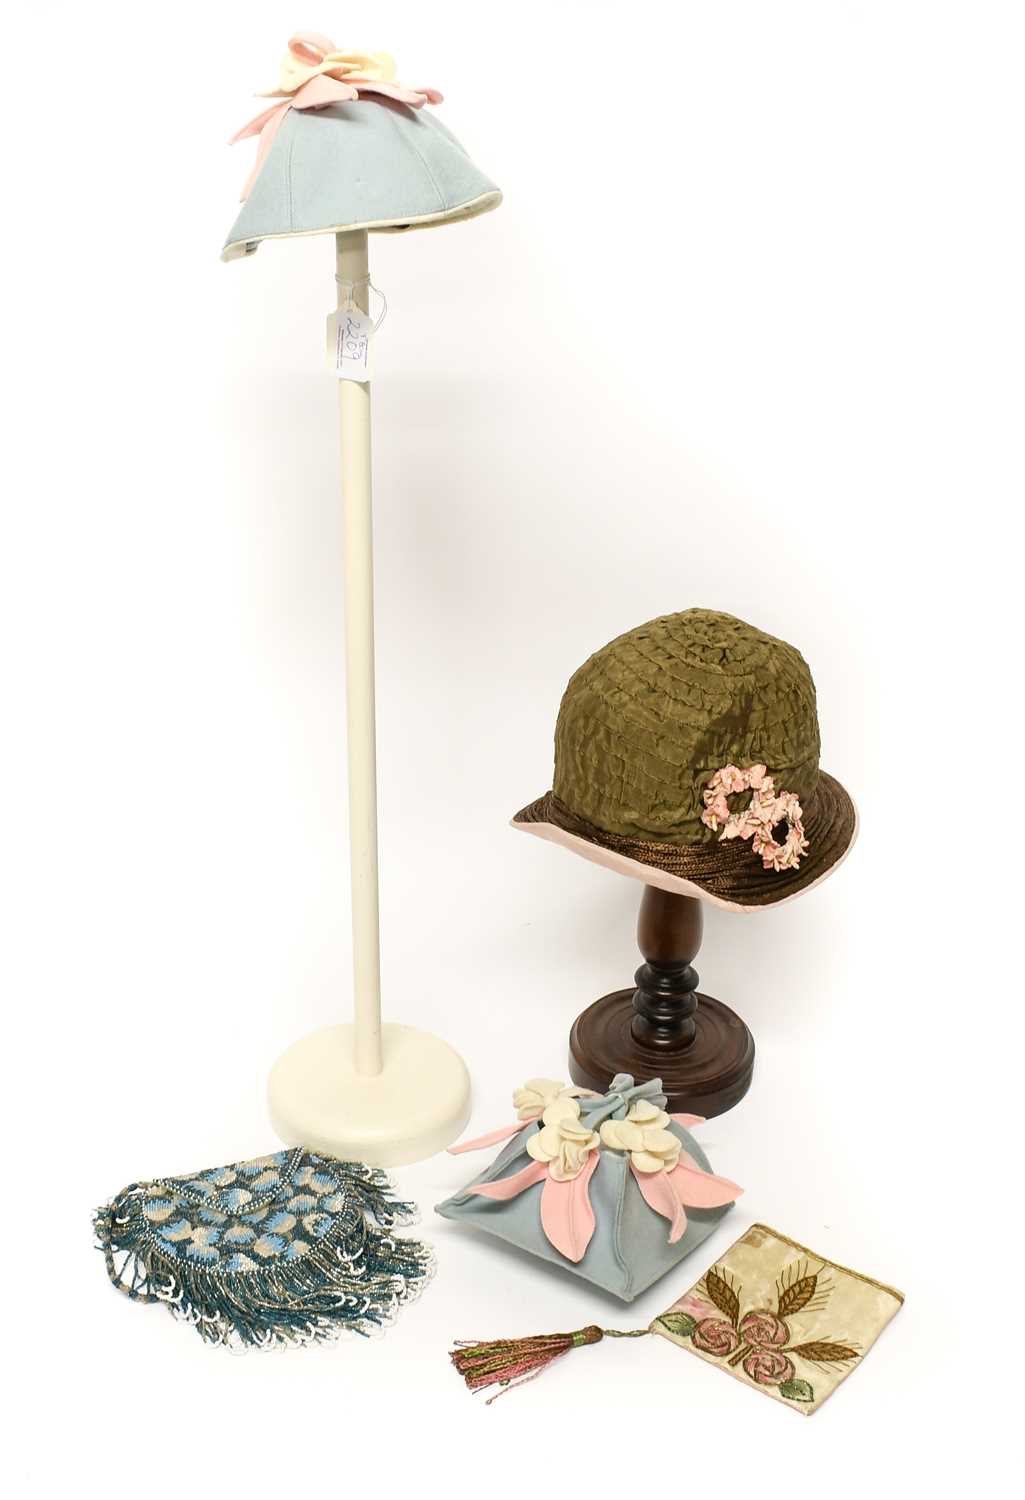 Assorted 20th Century Costume Accessories comprising a child's pale blue felt skull cap with pink